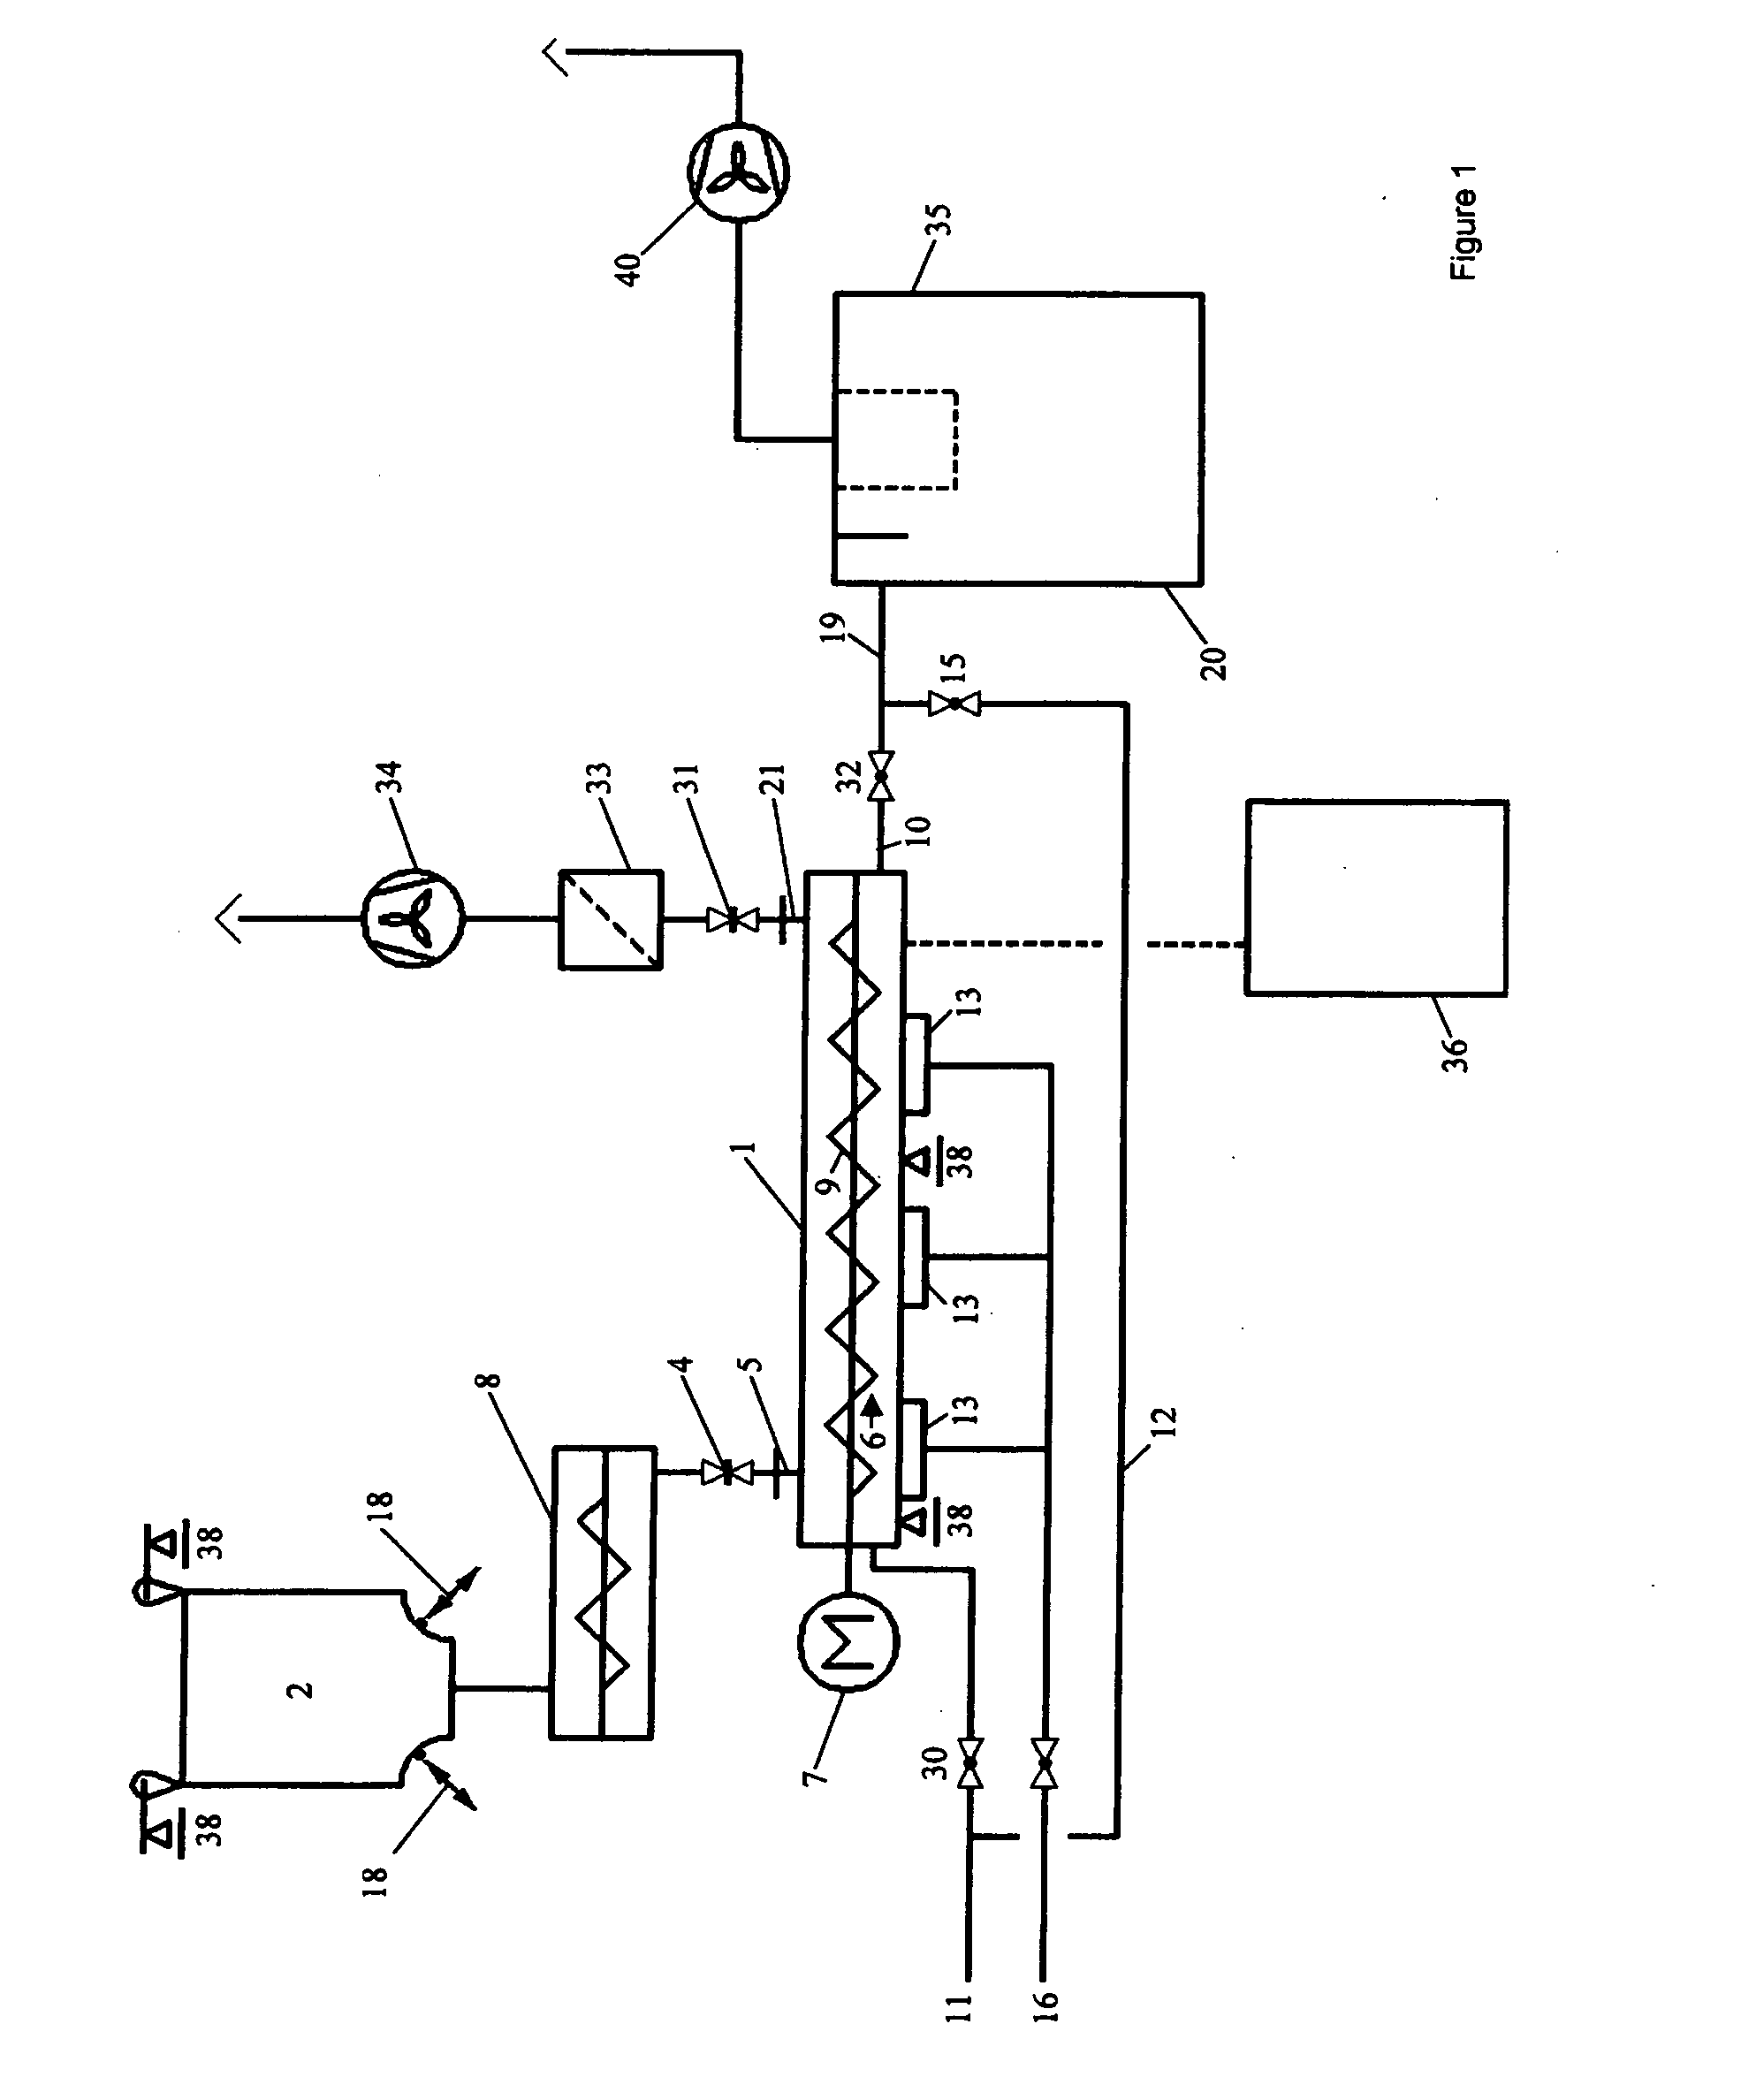 Method and apparatus for pneumatically conveying bulk material which does not flow readily